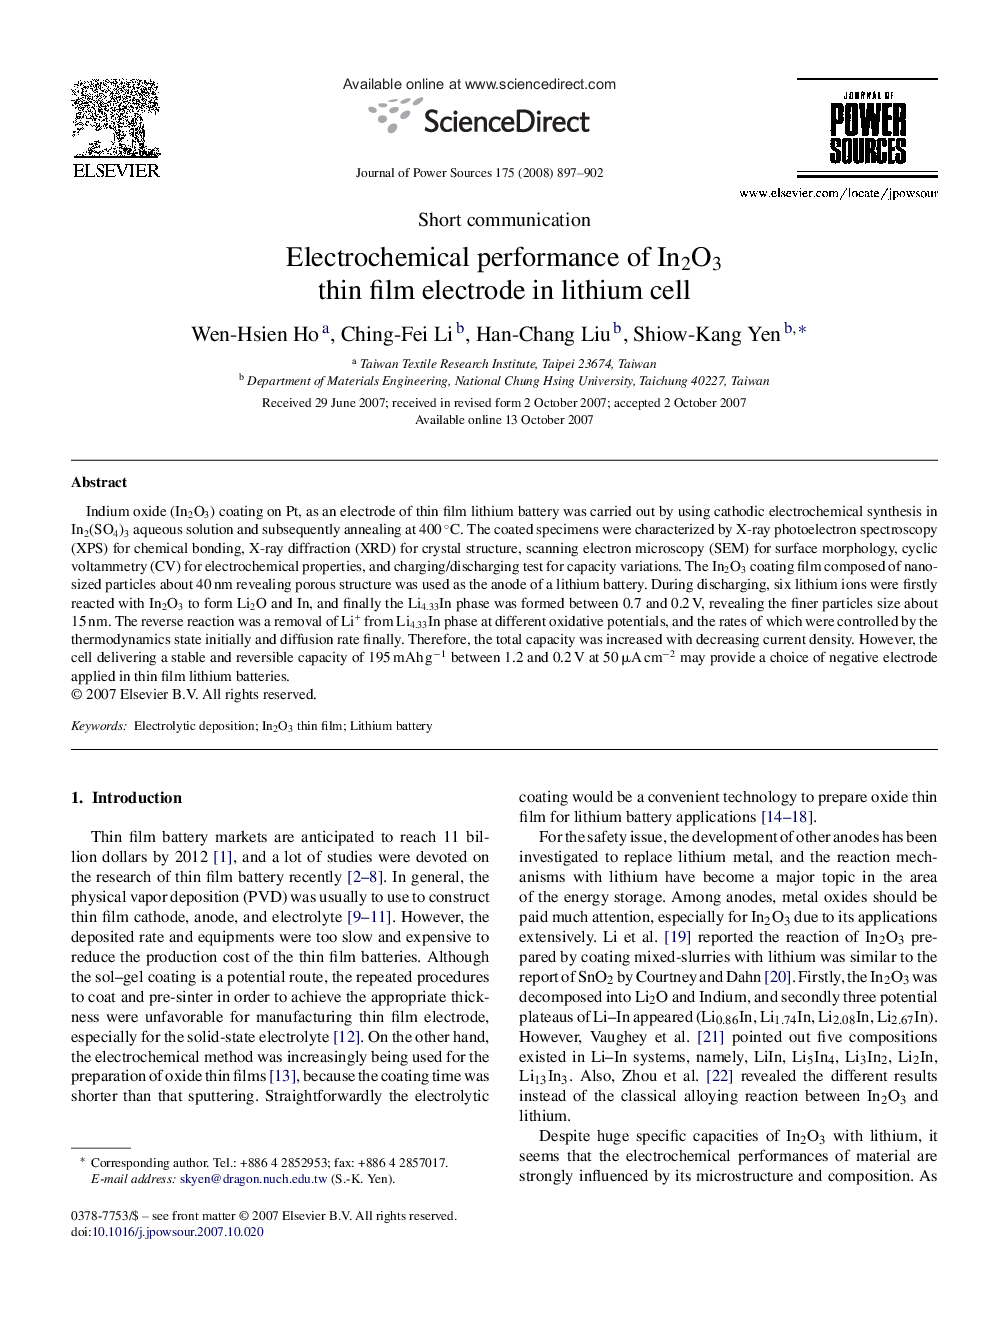 Electrochemical performance of In2O3 thin film electrode in lithium cell